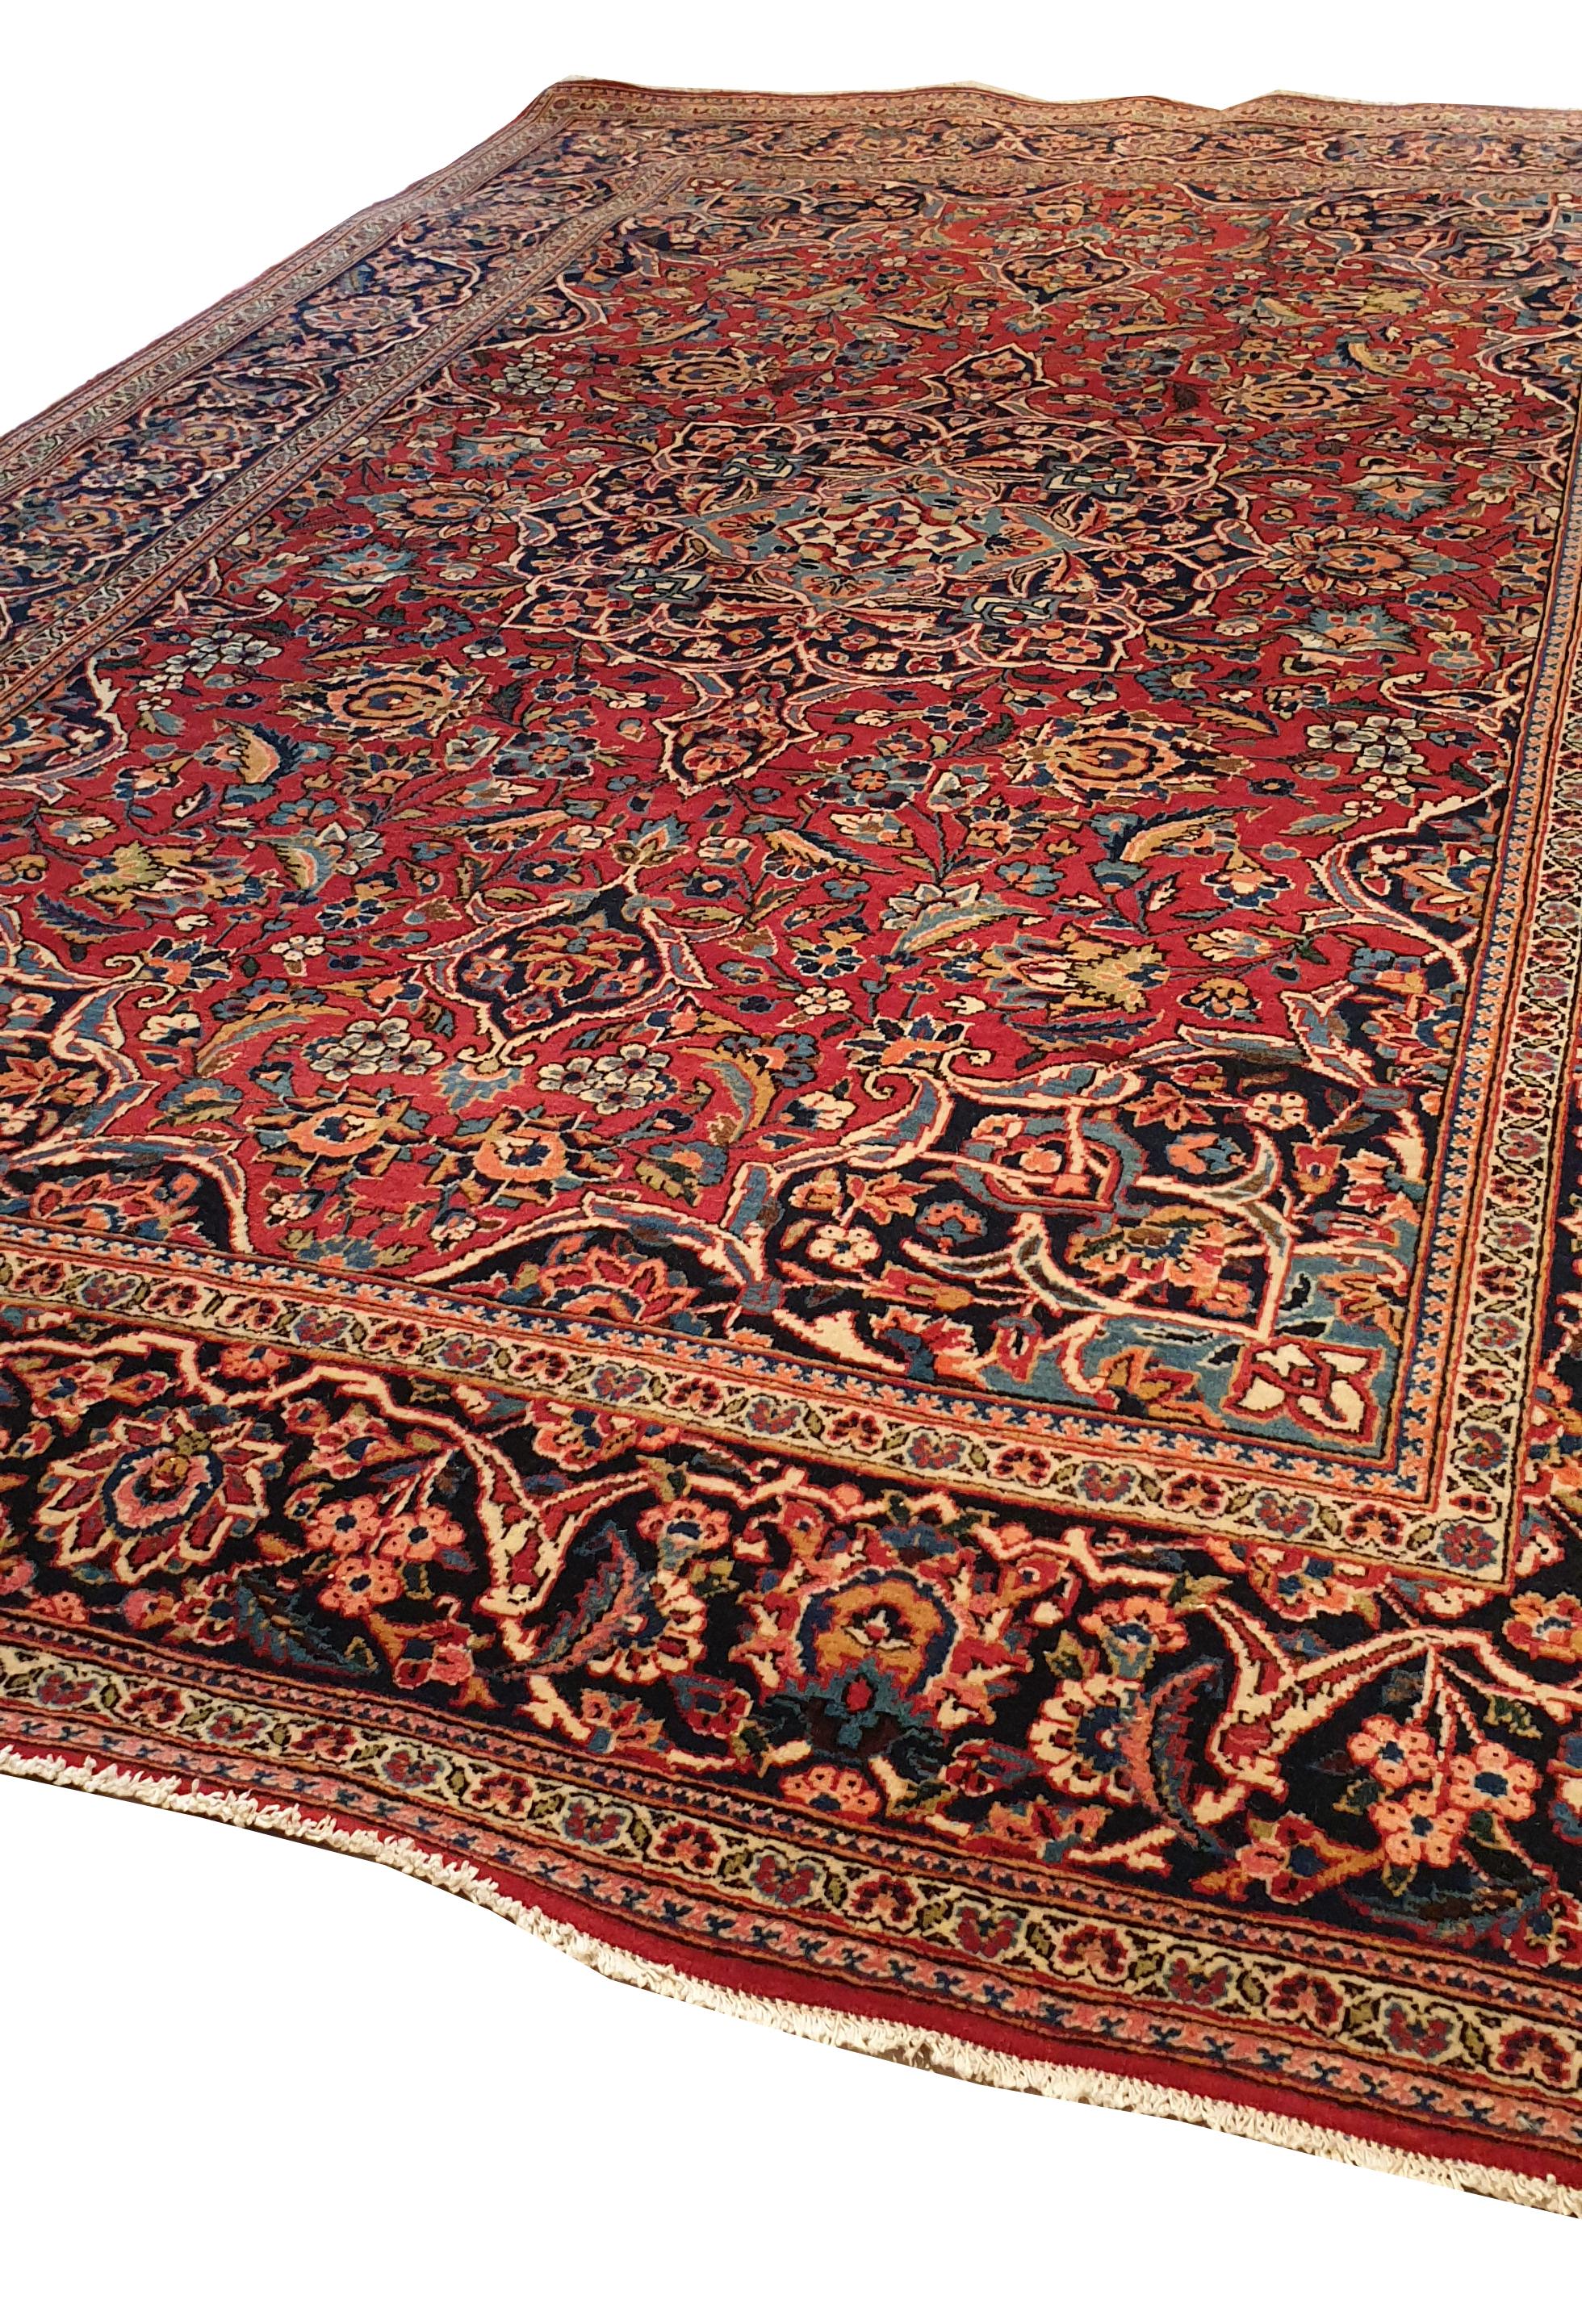 Hand-Knotted Oriental Carpet, 20th Century - N° 731 For Sale